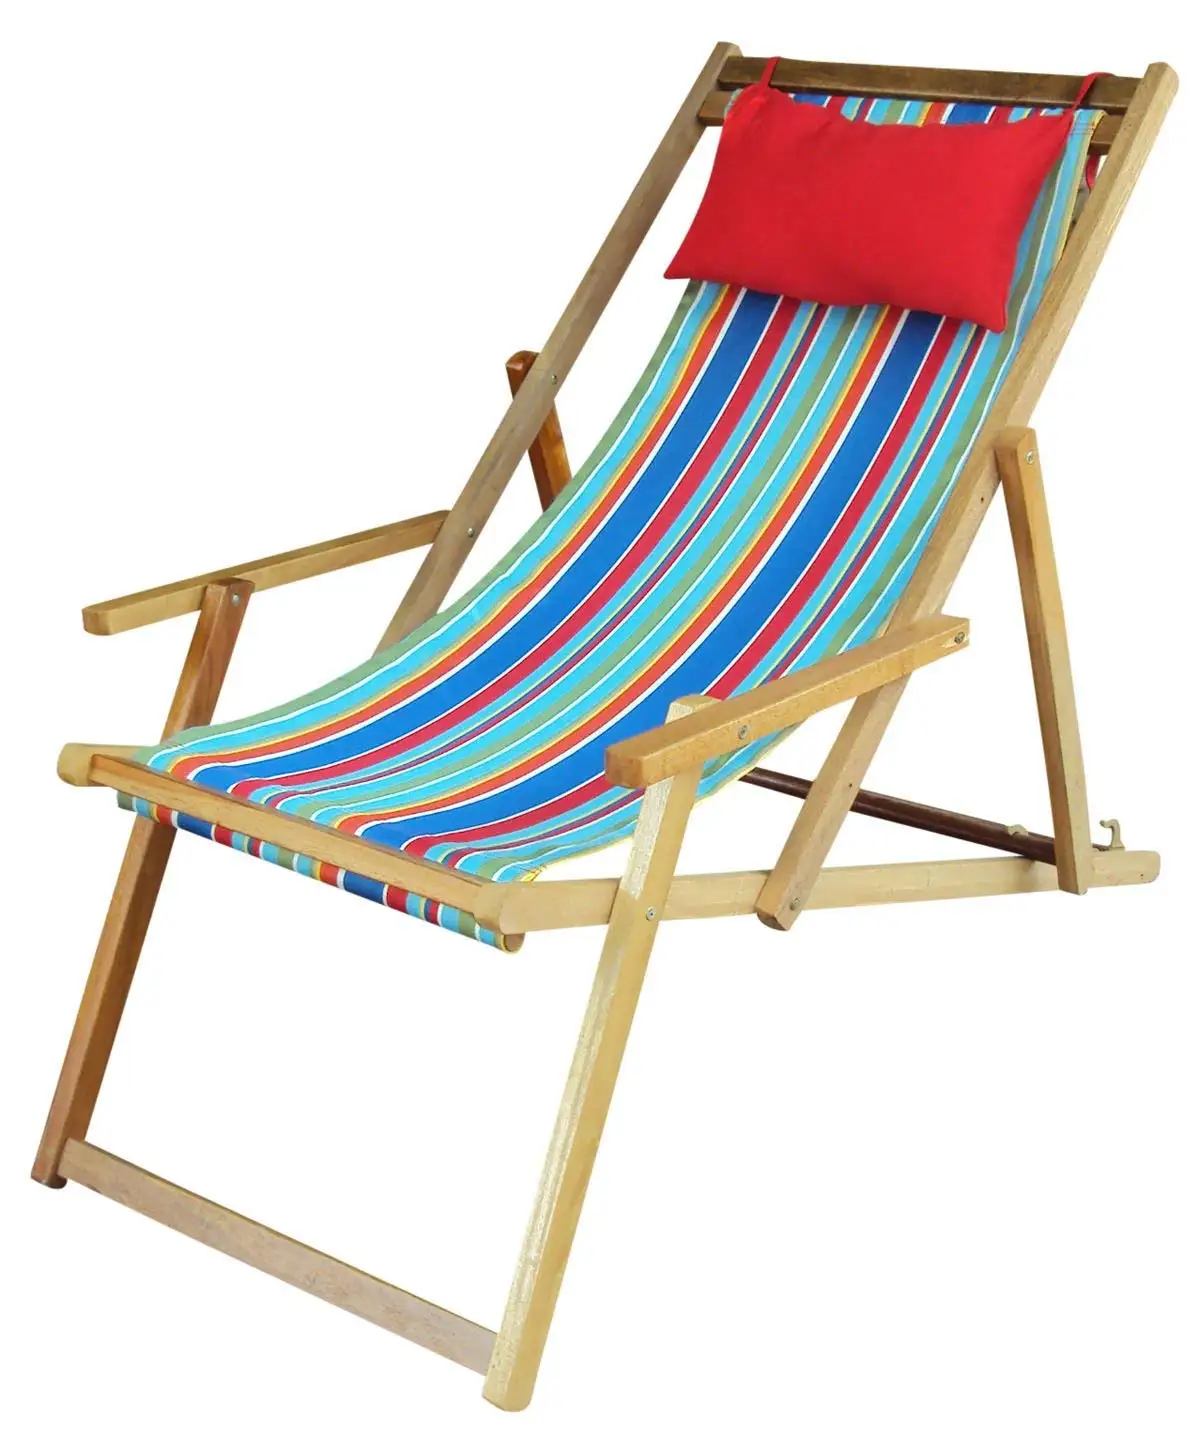 Wooden Deck Chair With Arm Rest And Comfort Pillow For A Single Person